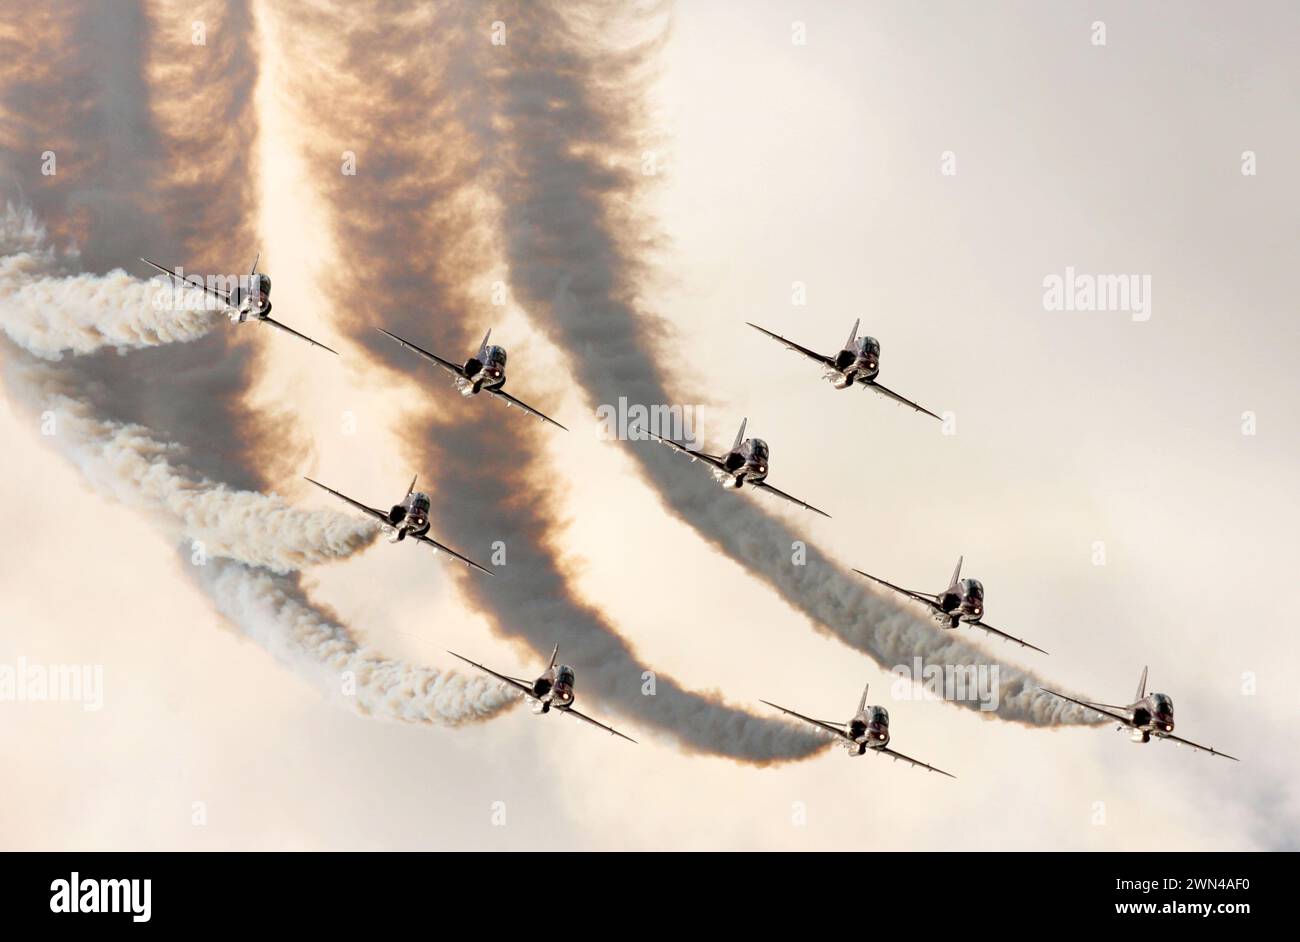 21/08/11..Undated file photo showing Red Arrows display.... Stock Photo